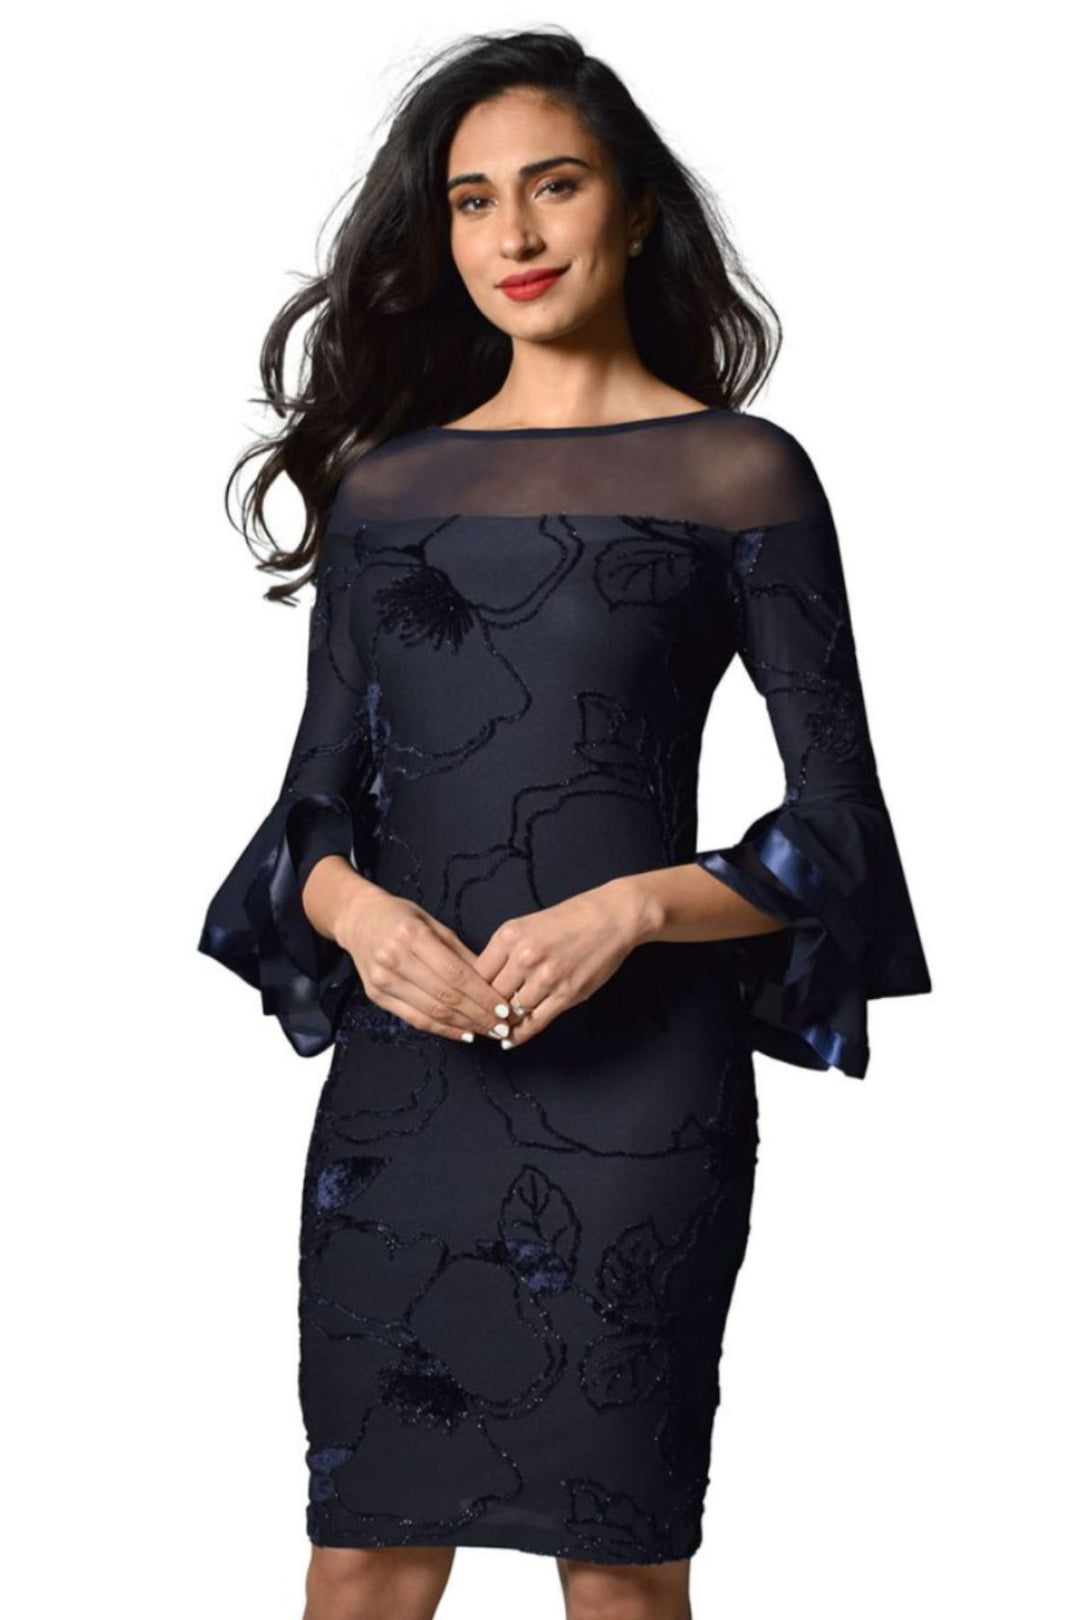 From the sensual neckline and the oversized textured pattern of florals the Veronica Dress by designer Frank Lyman will have you turning heads. This beautiful dress is slim fitting and features a sheer off the shoulder neckline, slender 3/4 sleeves finished with tiered ruffle cuffs. Brand : Frank Lyman Style Code : 219221 Colour: Navy Fabric : 50% Polyester; 40% Rayon; 5% Metallic; 5% Elastane Hand wash only  Pull On closure Hand Wash Only 3/4 Sleeves  Knee length